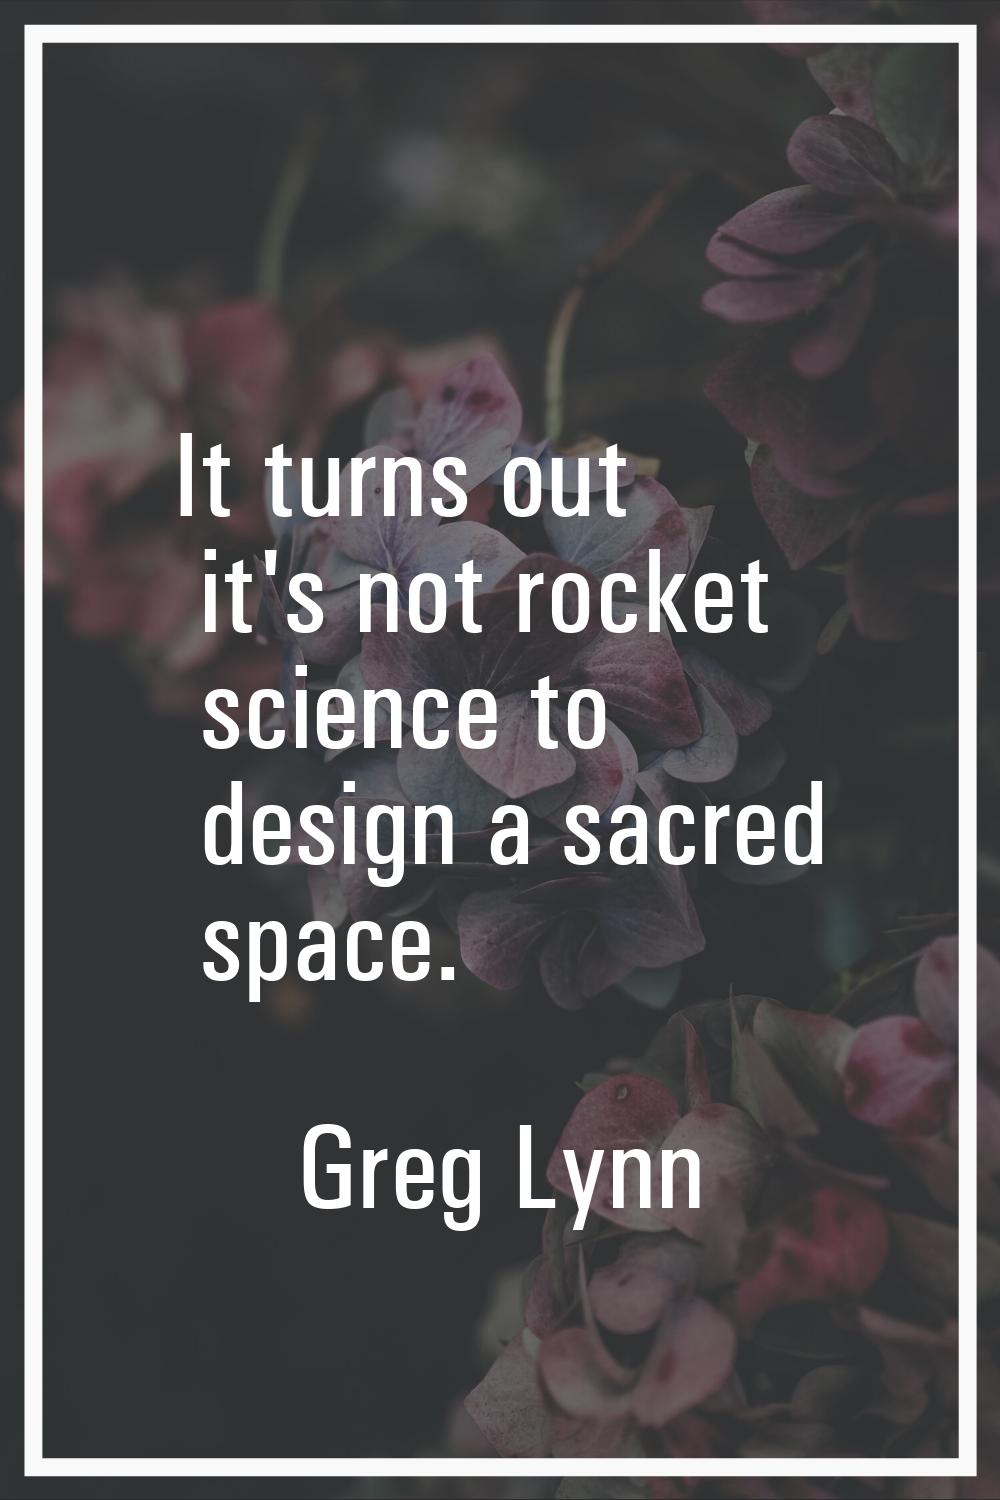 It turns out it's not rocket science to design a sacred space.